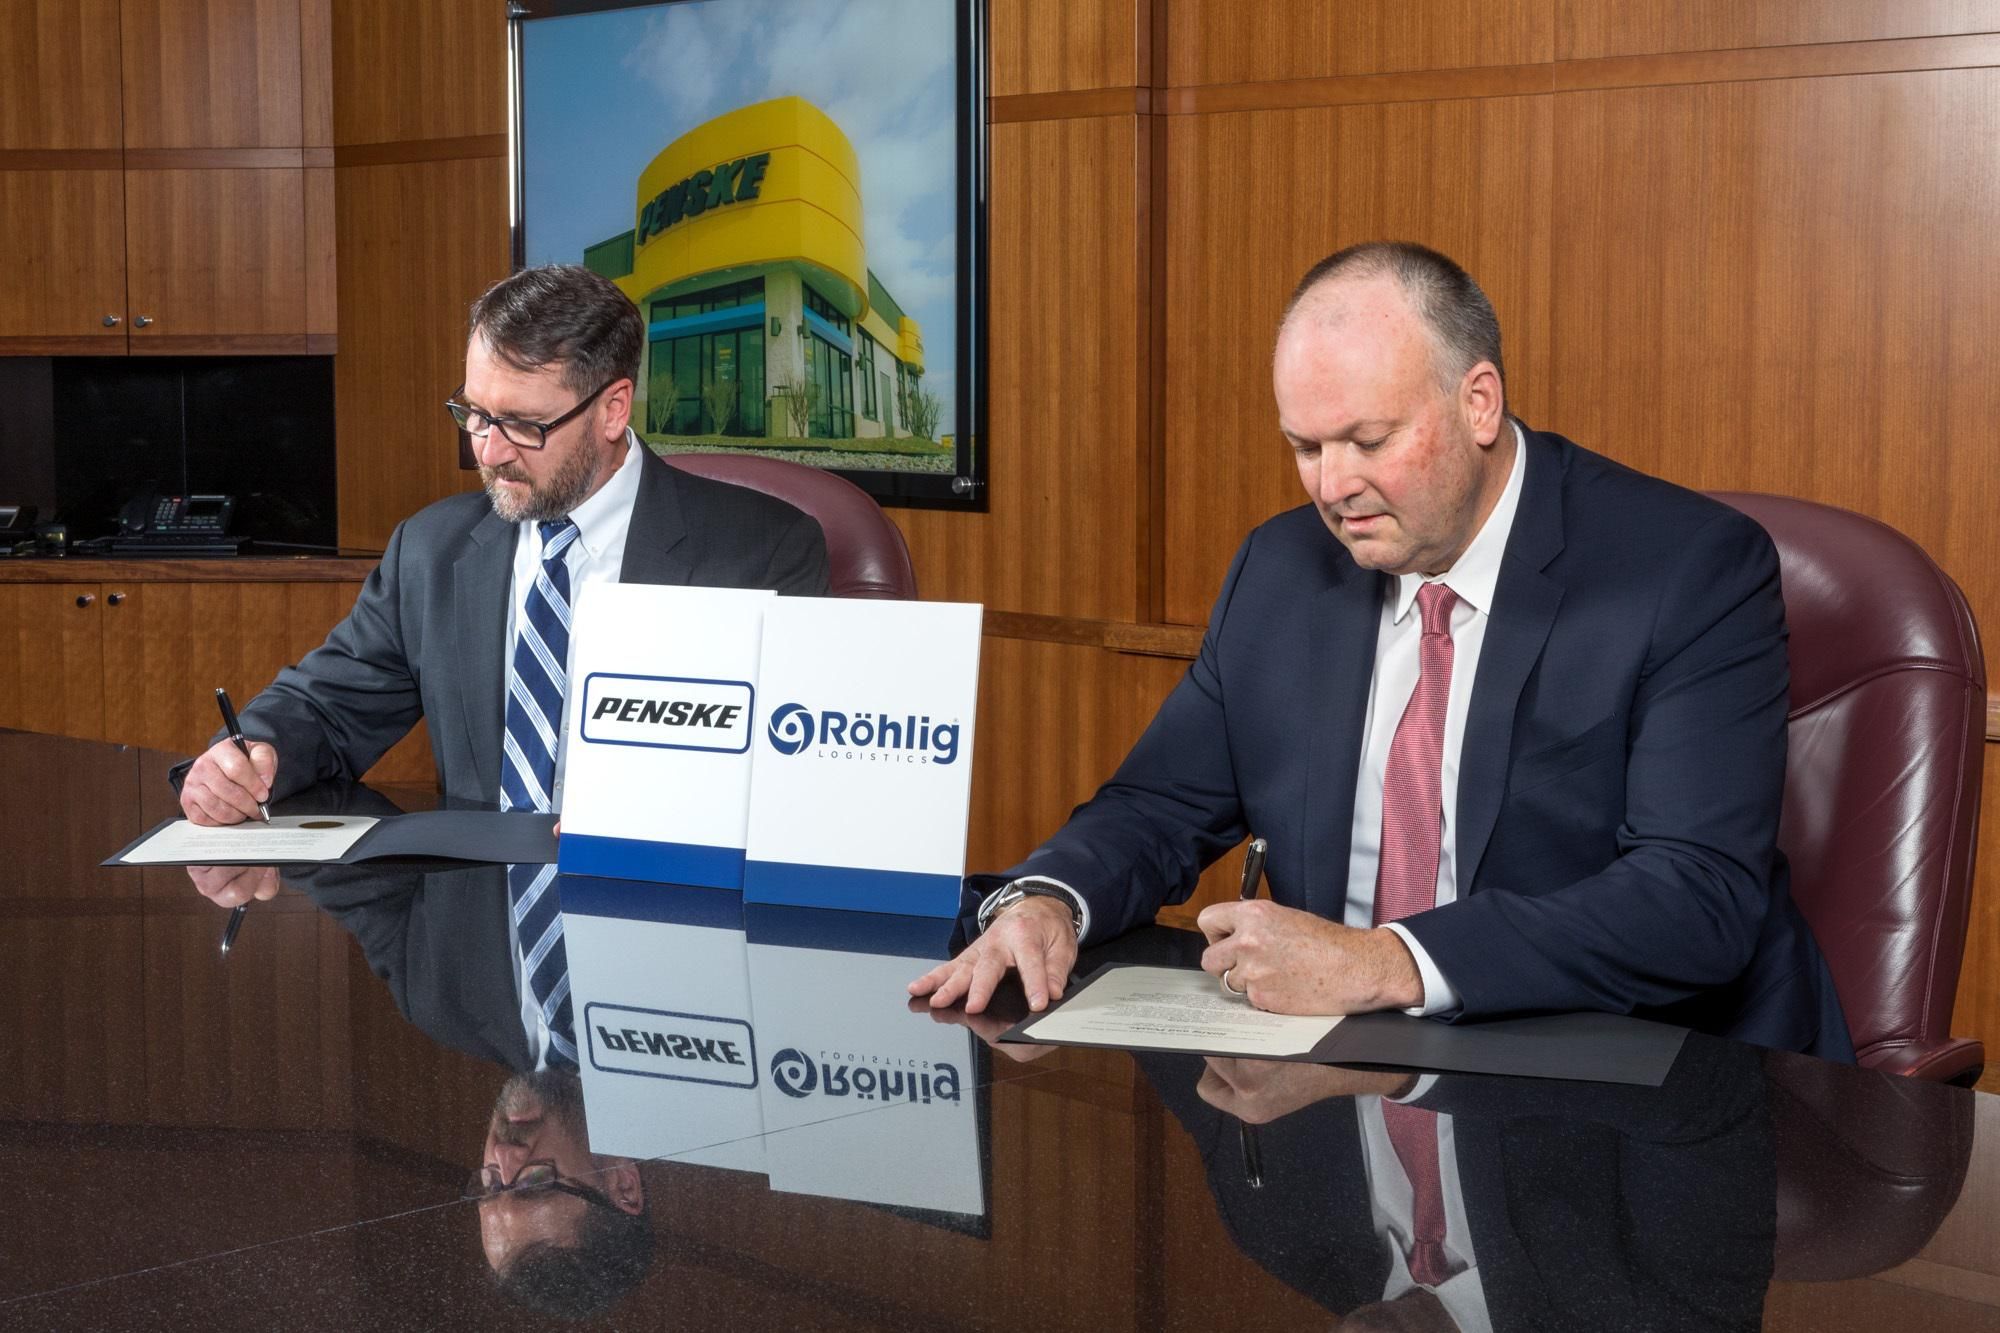 Röhlig Logistics and Penske Logistics today announced the formation of a new contract logistics joint venture company called Rohlig Penske Logistics GmbH, operating primarily in Germany and the Netherlands.